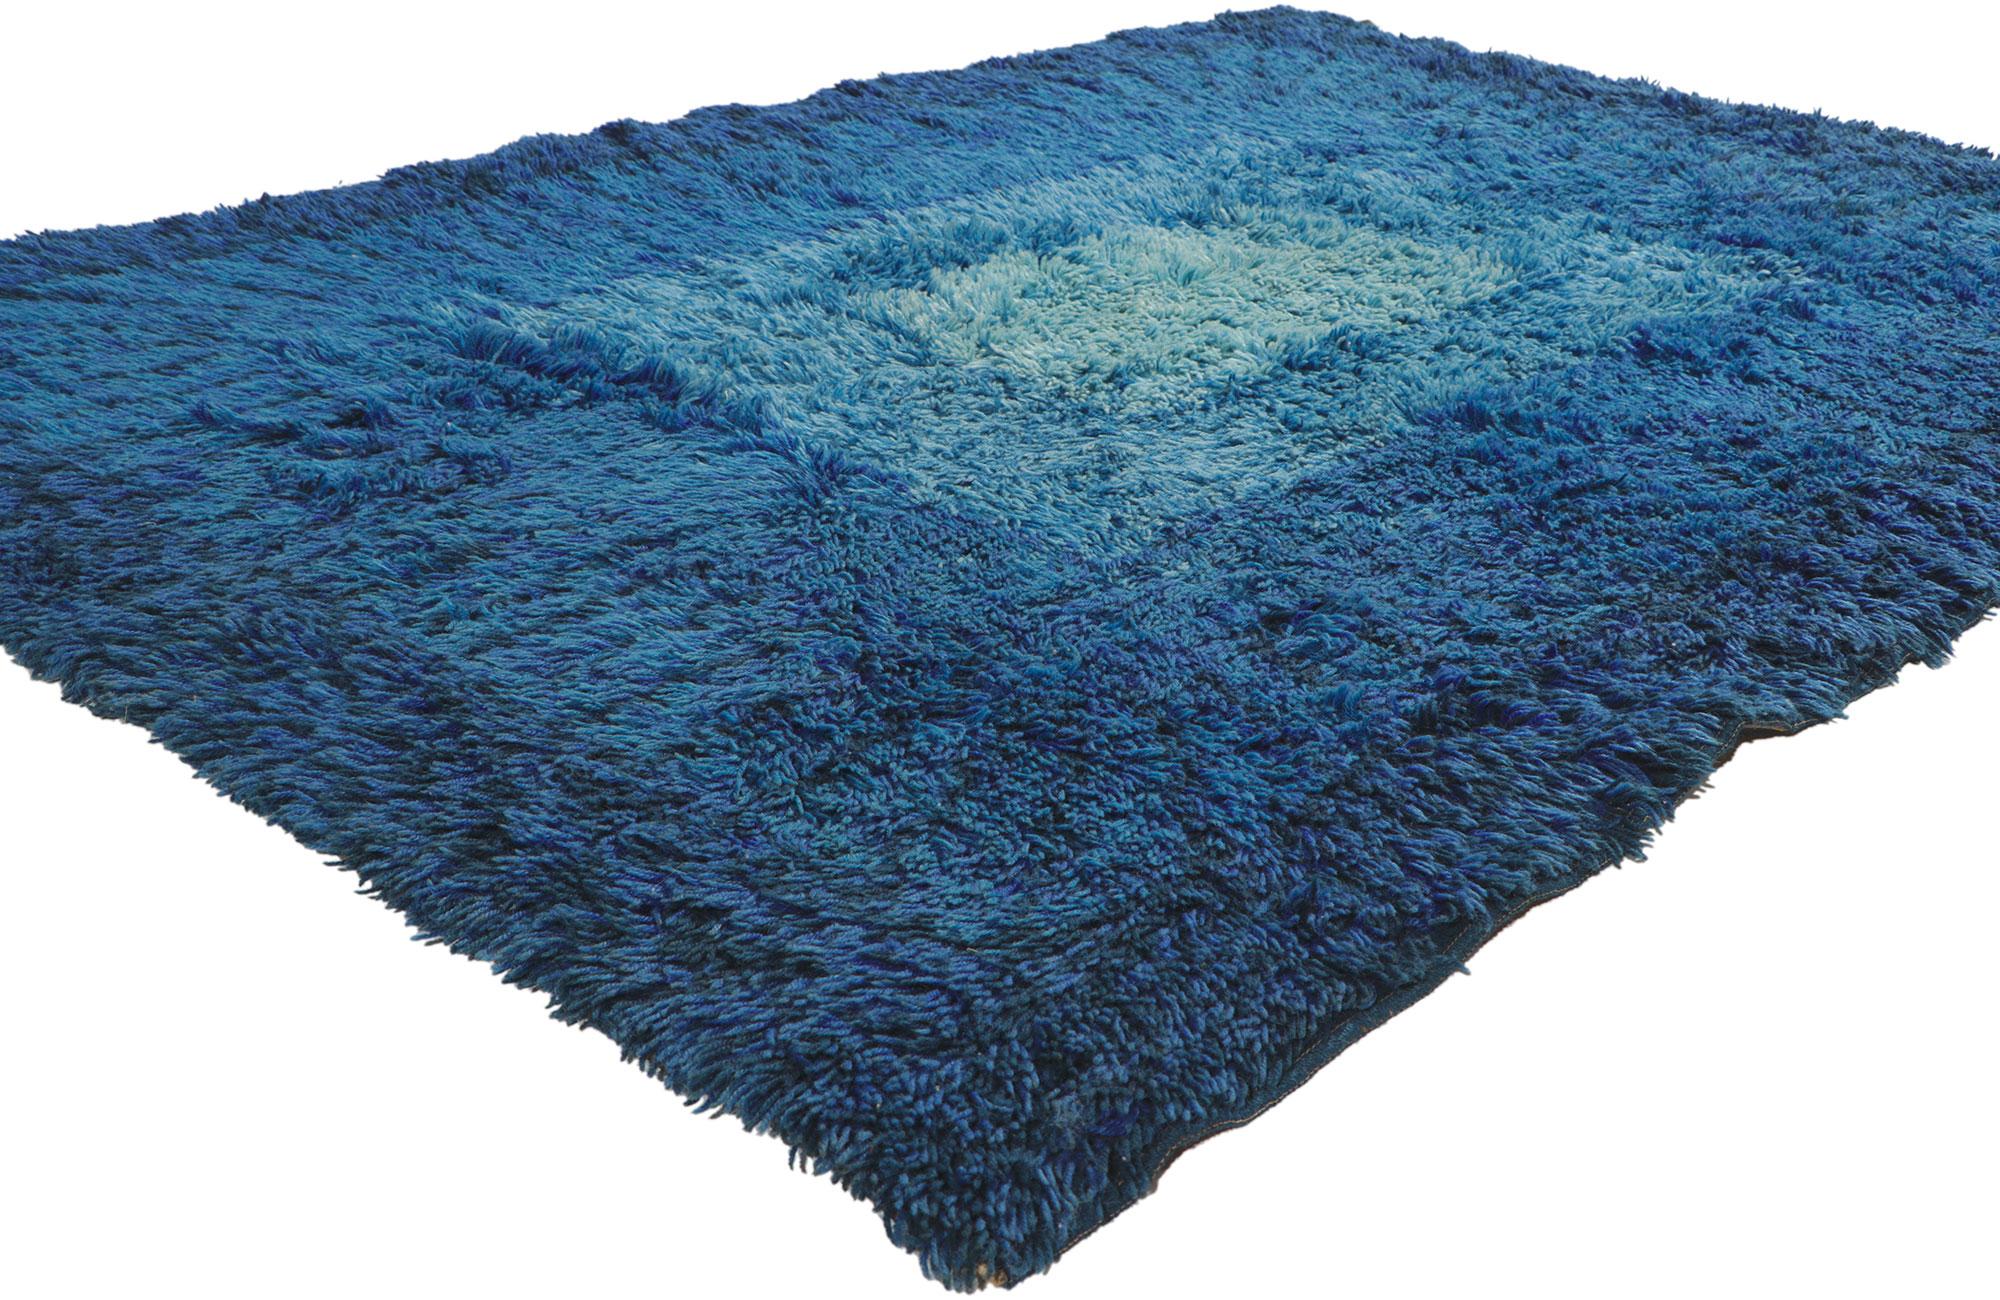 78511 Vintage Swedish Rya Rug, 04'05 x 06'02.
Emanating Scandinavian Modern style with incredible detail and texture, this hand knotted Swedish rya rug is a captivating vision of woven beauty. The dynamic geometric design and tonal blue color